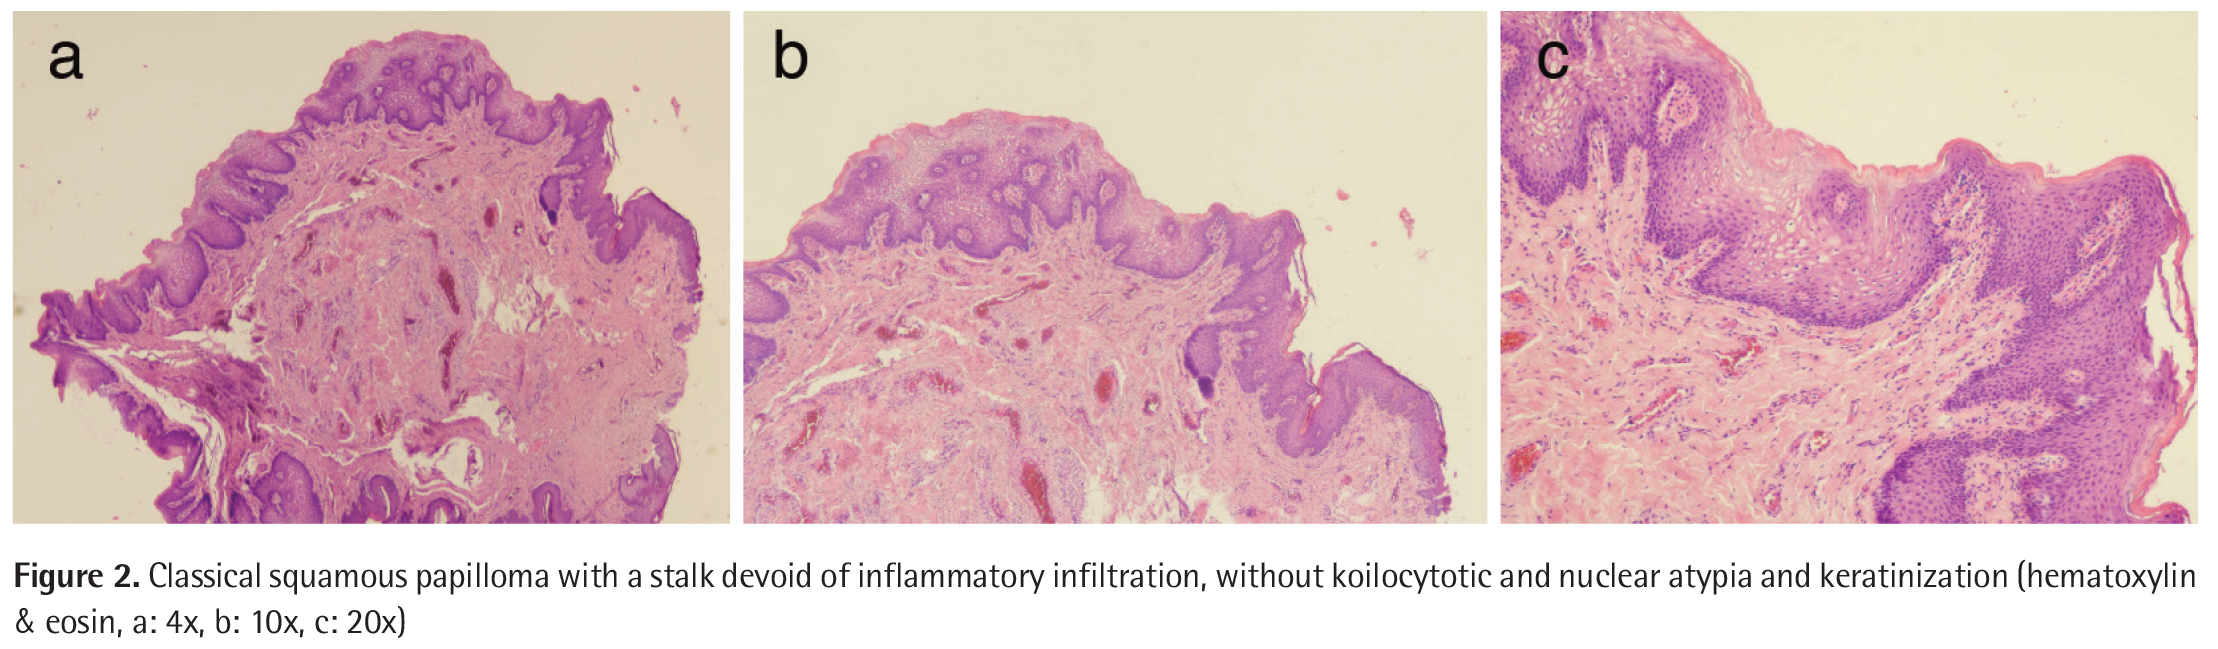 Bladder cell papilloma Urothelial papillomas, Transitional cell papilloma of the bladder